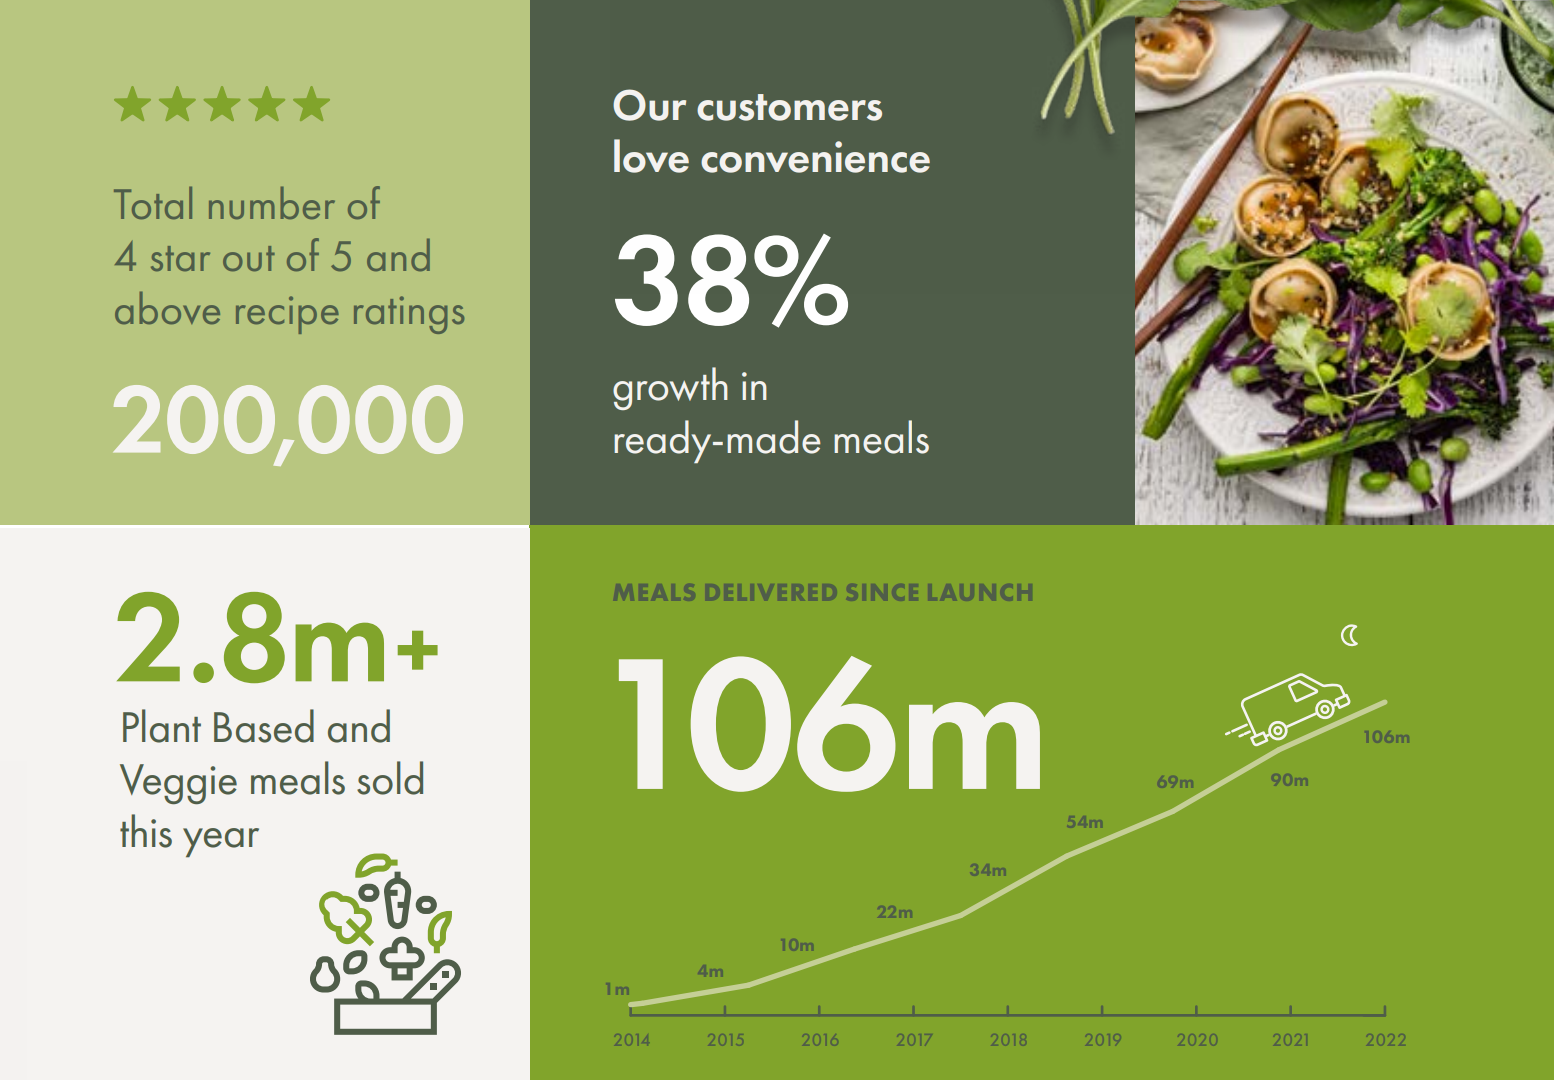 (Source: My Food Bag) An infographic displaying the growth in ready-made meals; vegetarian orders 